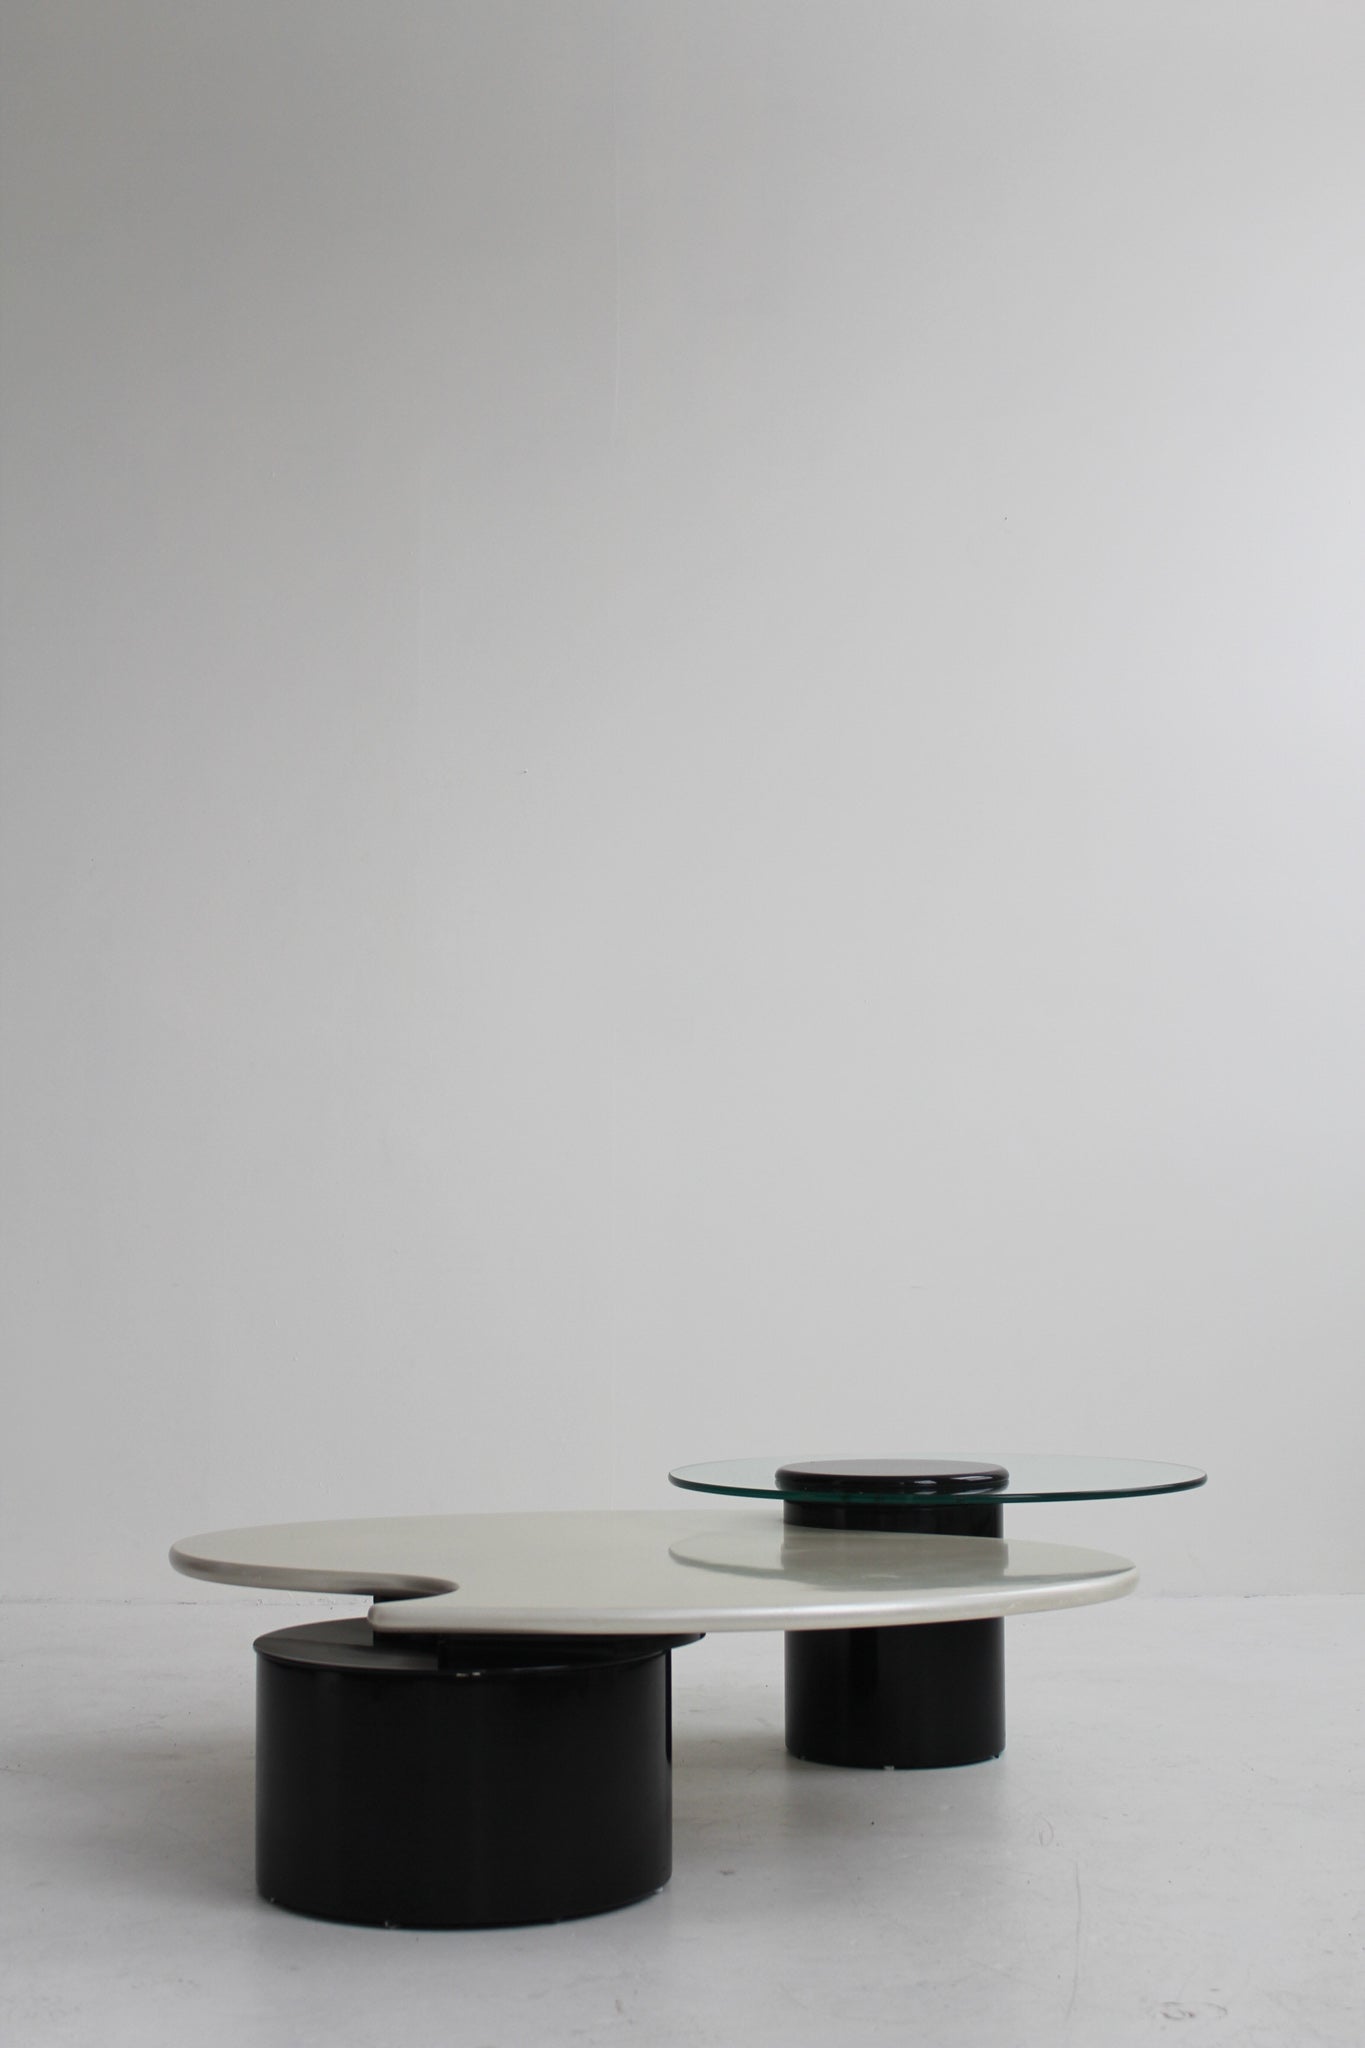 Multi-Level Coffee Table by Roger Rougier